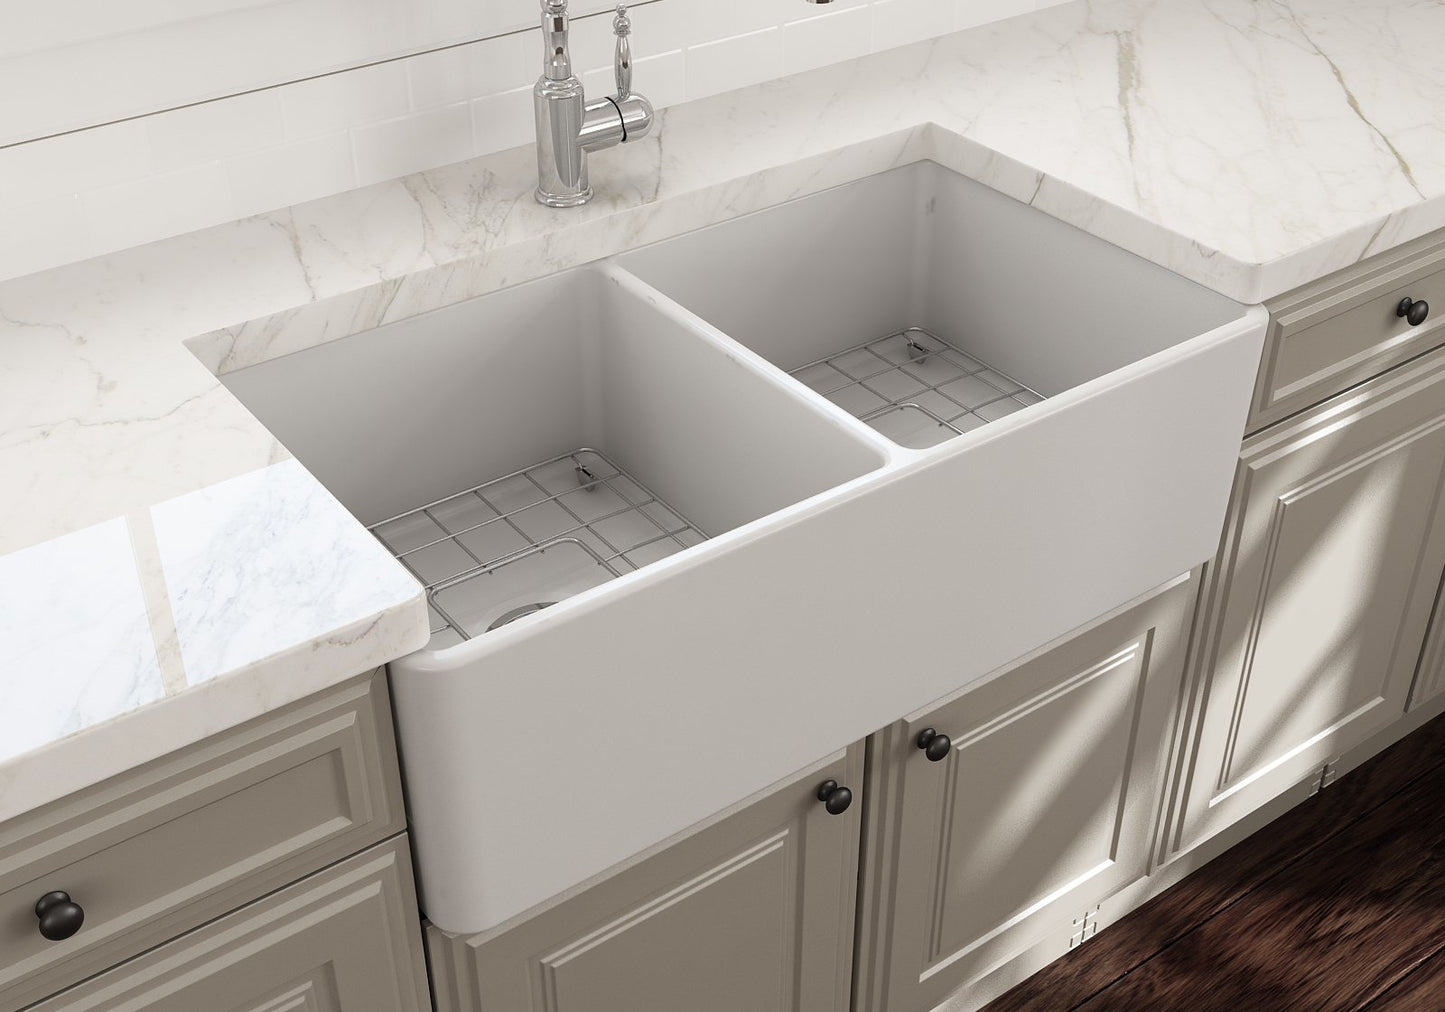 Bocchi Farmhouse Apron Front Fireclay 33" Double Bowl Kitchen Sink (Call for special pricing)